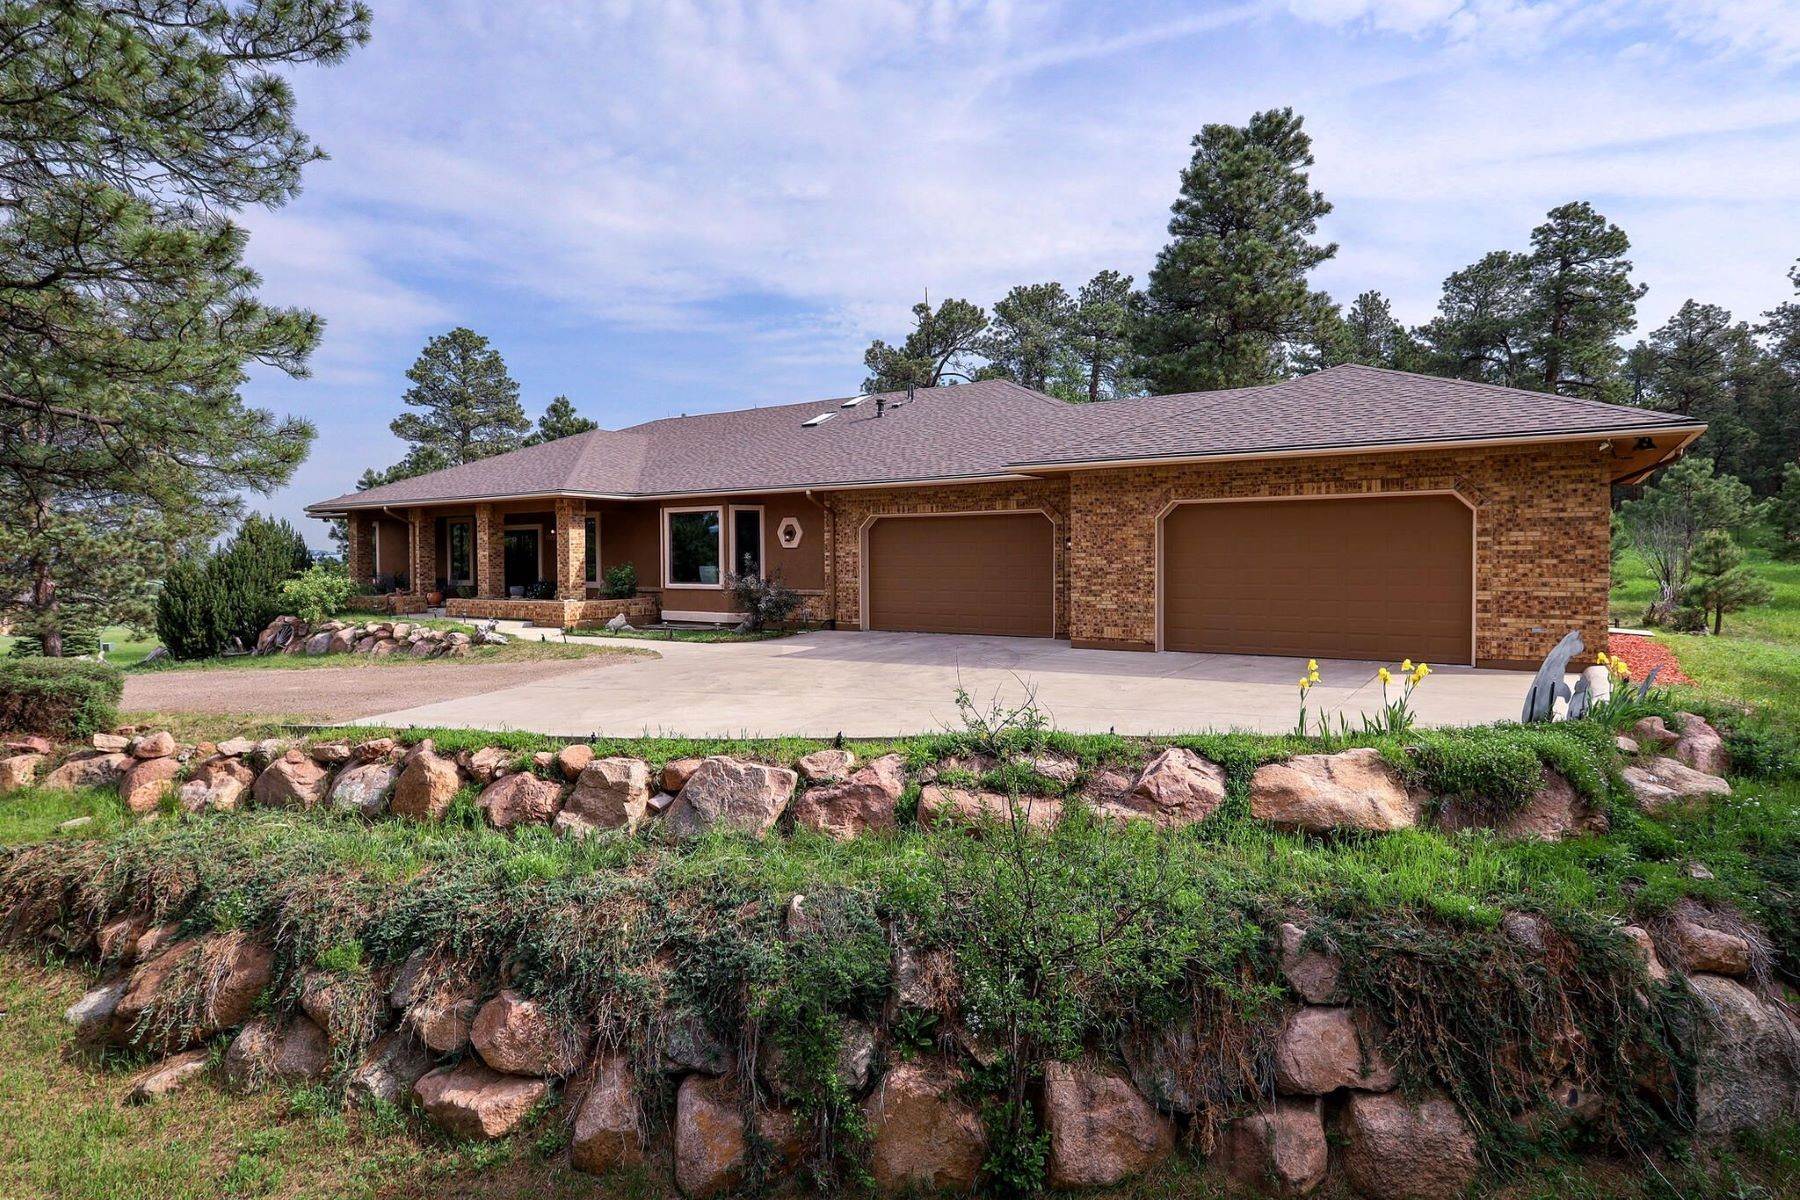 Single Family Homes for Active at Unmistakable Beauty and Distinctive Stature! 17675 State Highway 83 Colorado Springs, Colorado 80908 United States